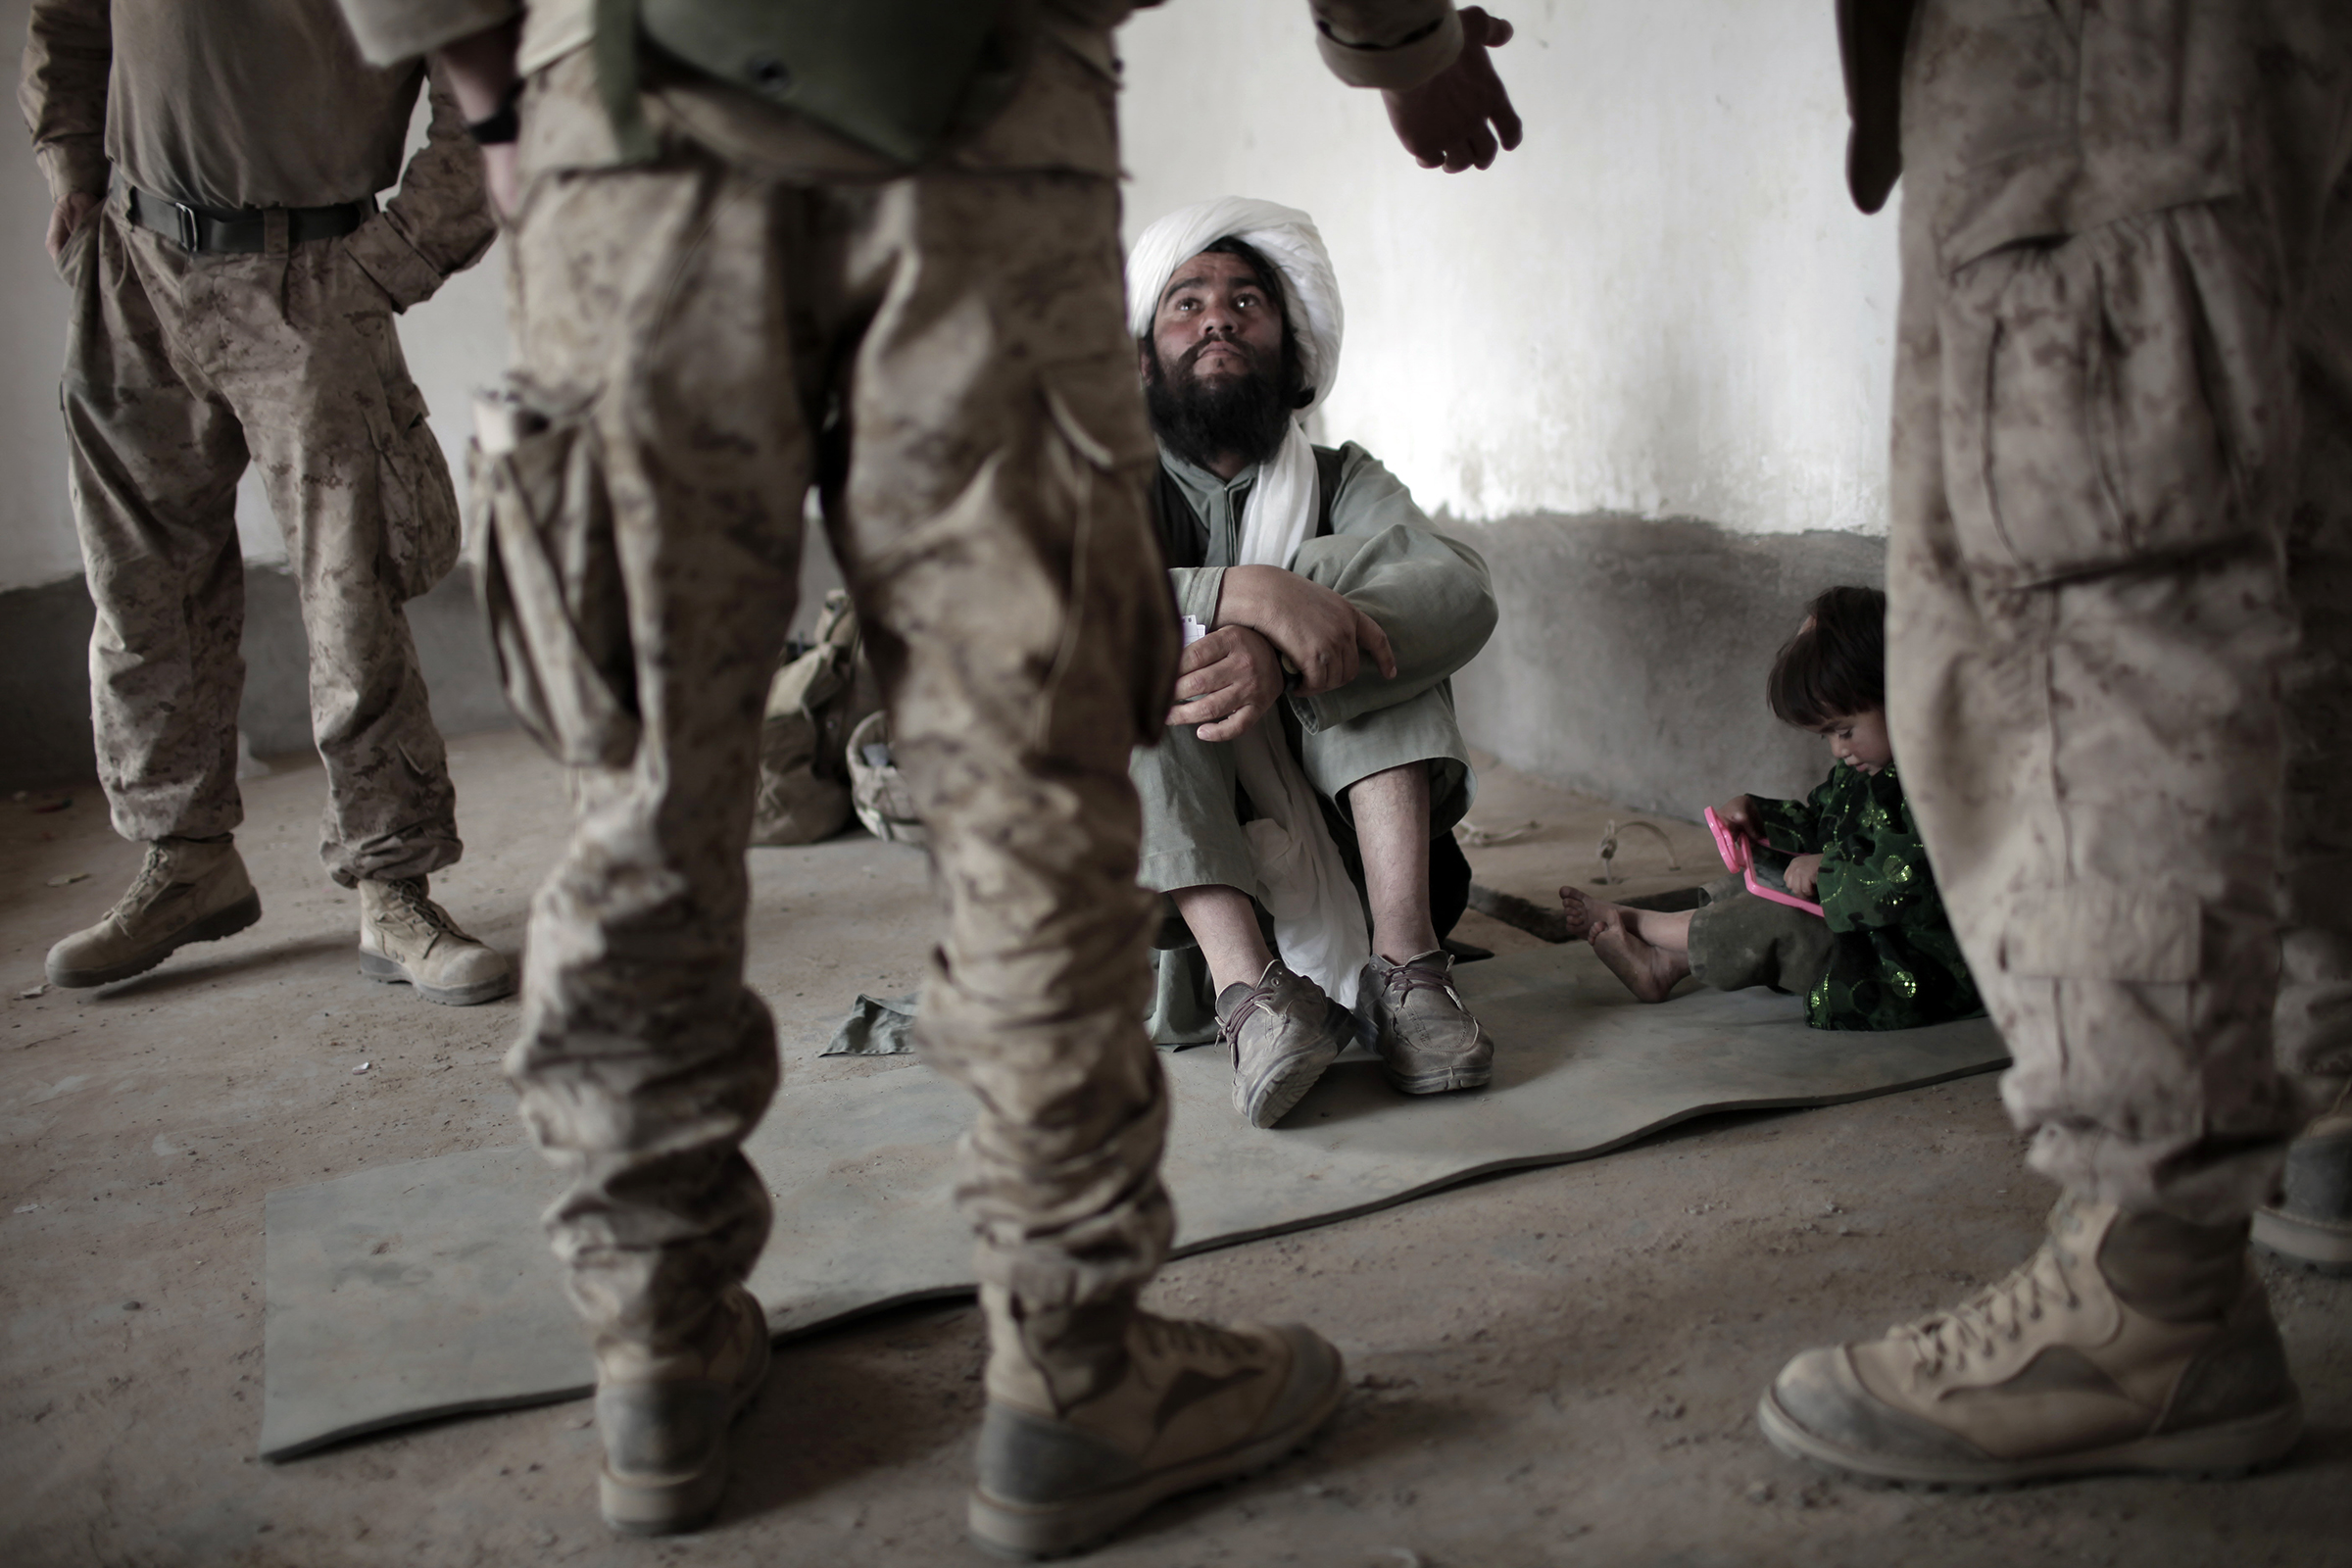 An imam listens to an interpreter for U.S. forces in Marjah, southern Afghanistan, in 2010. (Mauricio Lima—AFP/Getty Images)